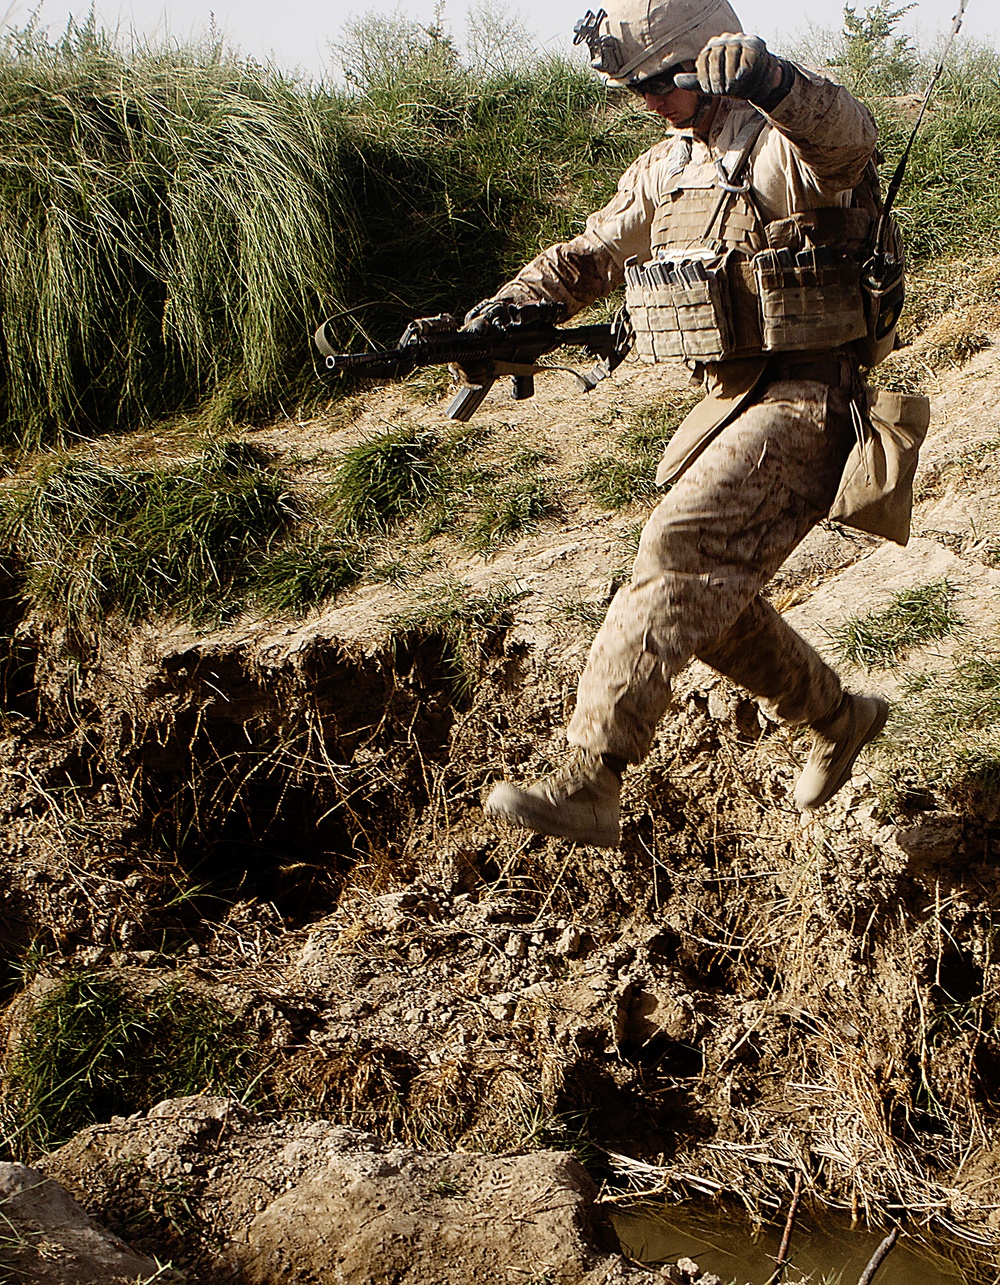 A sandstorm, IED and the squad that overcame